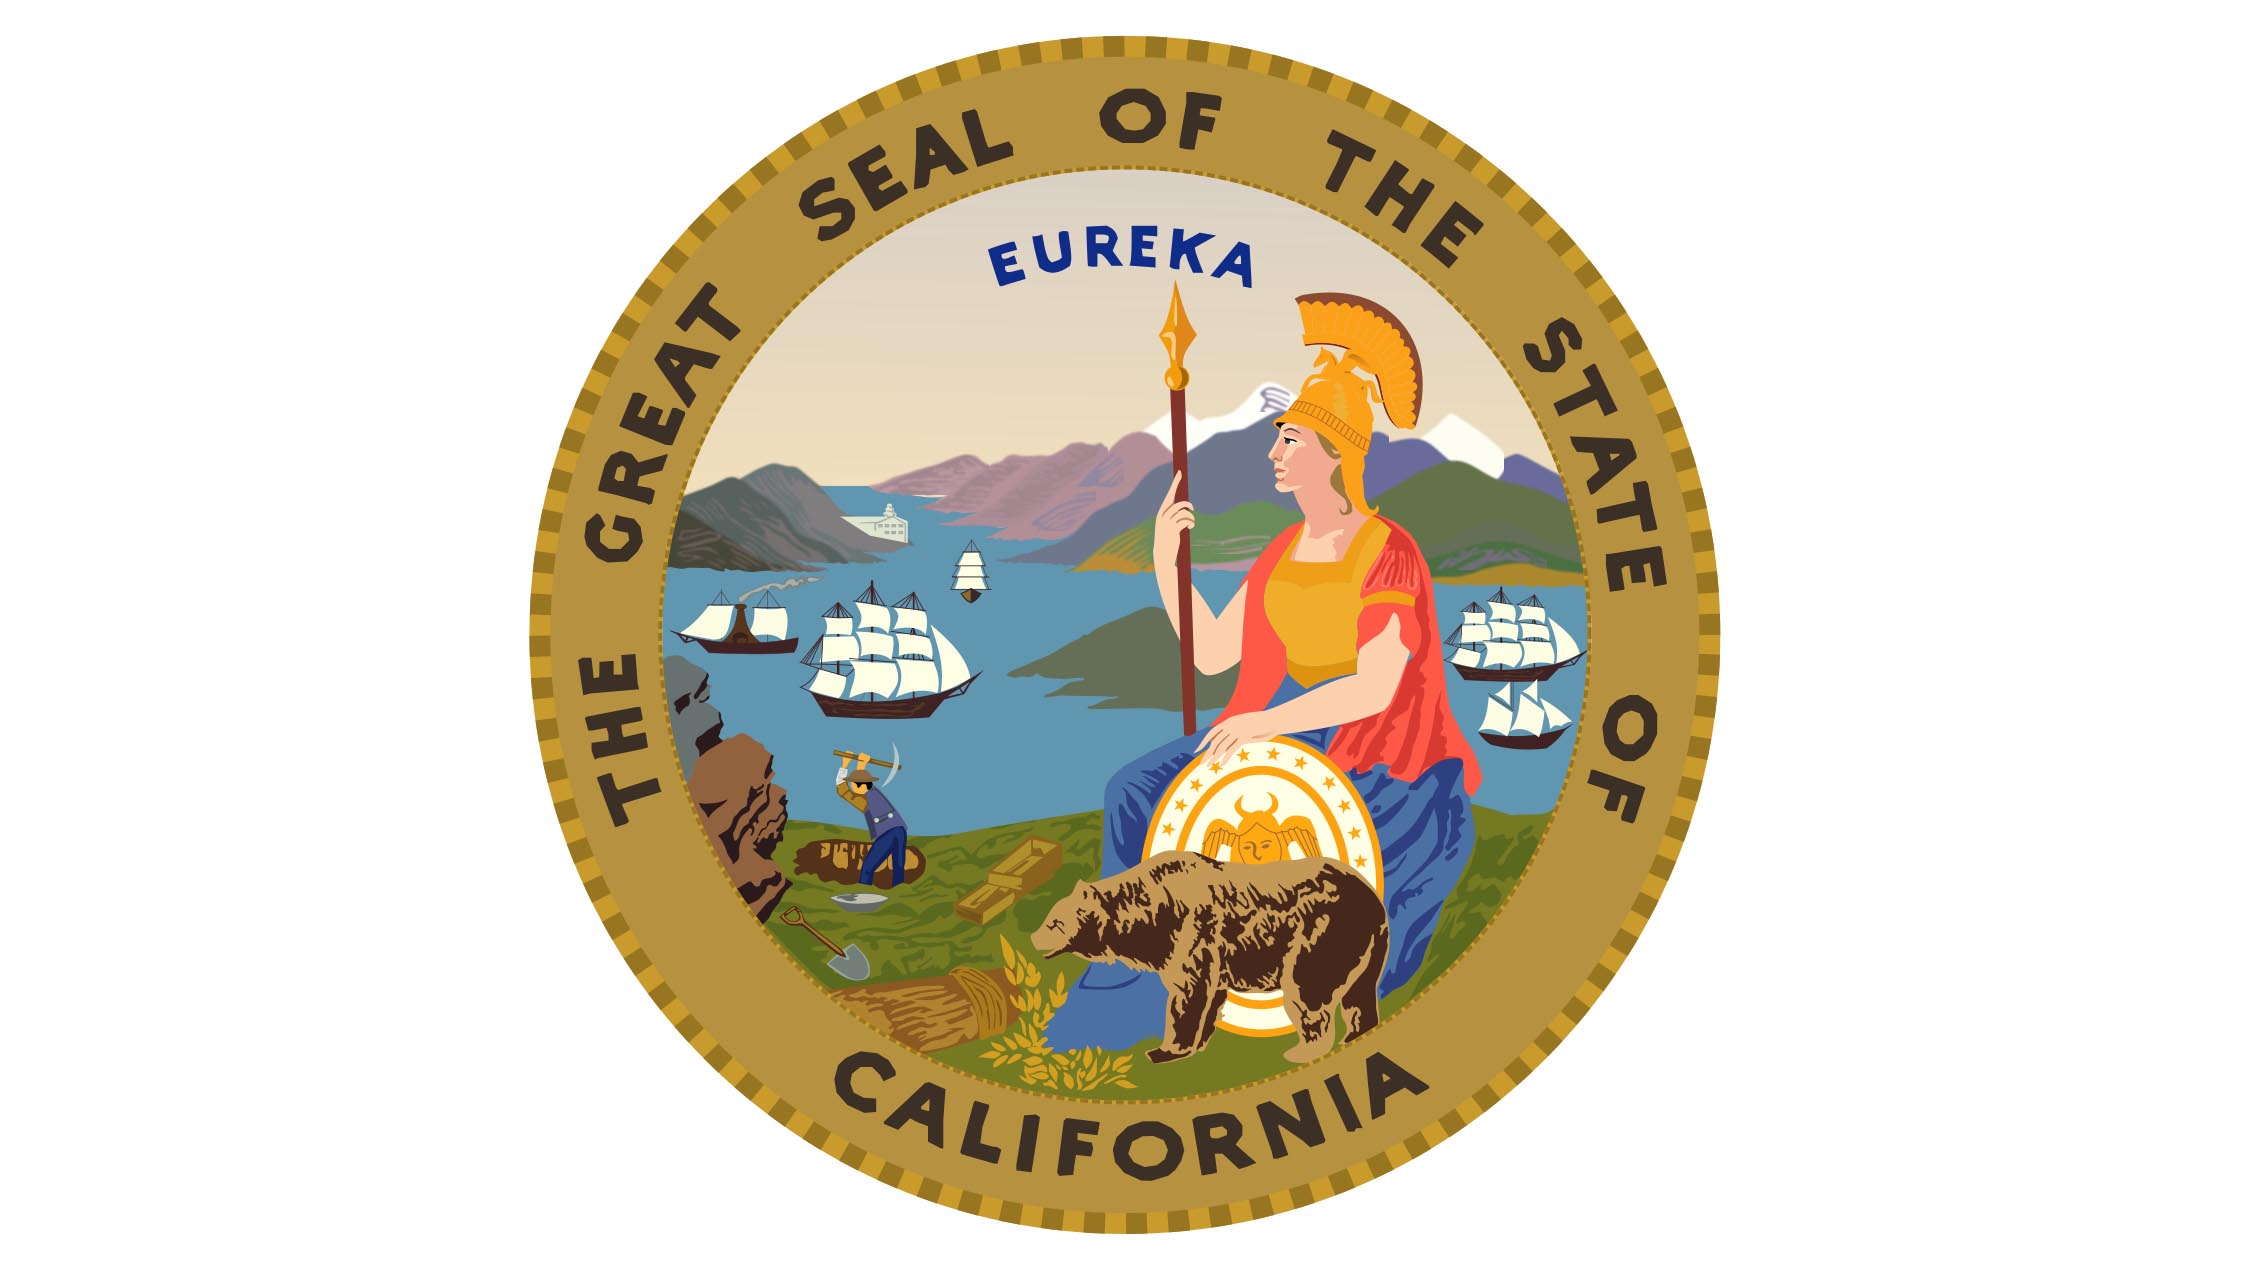 California Governor Newsom Signs SB 54: New California Law Requires All Packaging to Be Recyclable or Compostable and Shifts Burden of Plastic Waste to the Plastics and Packaging Industry